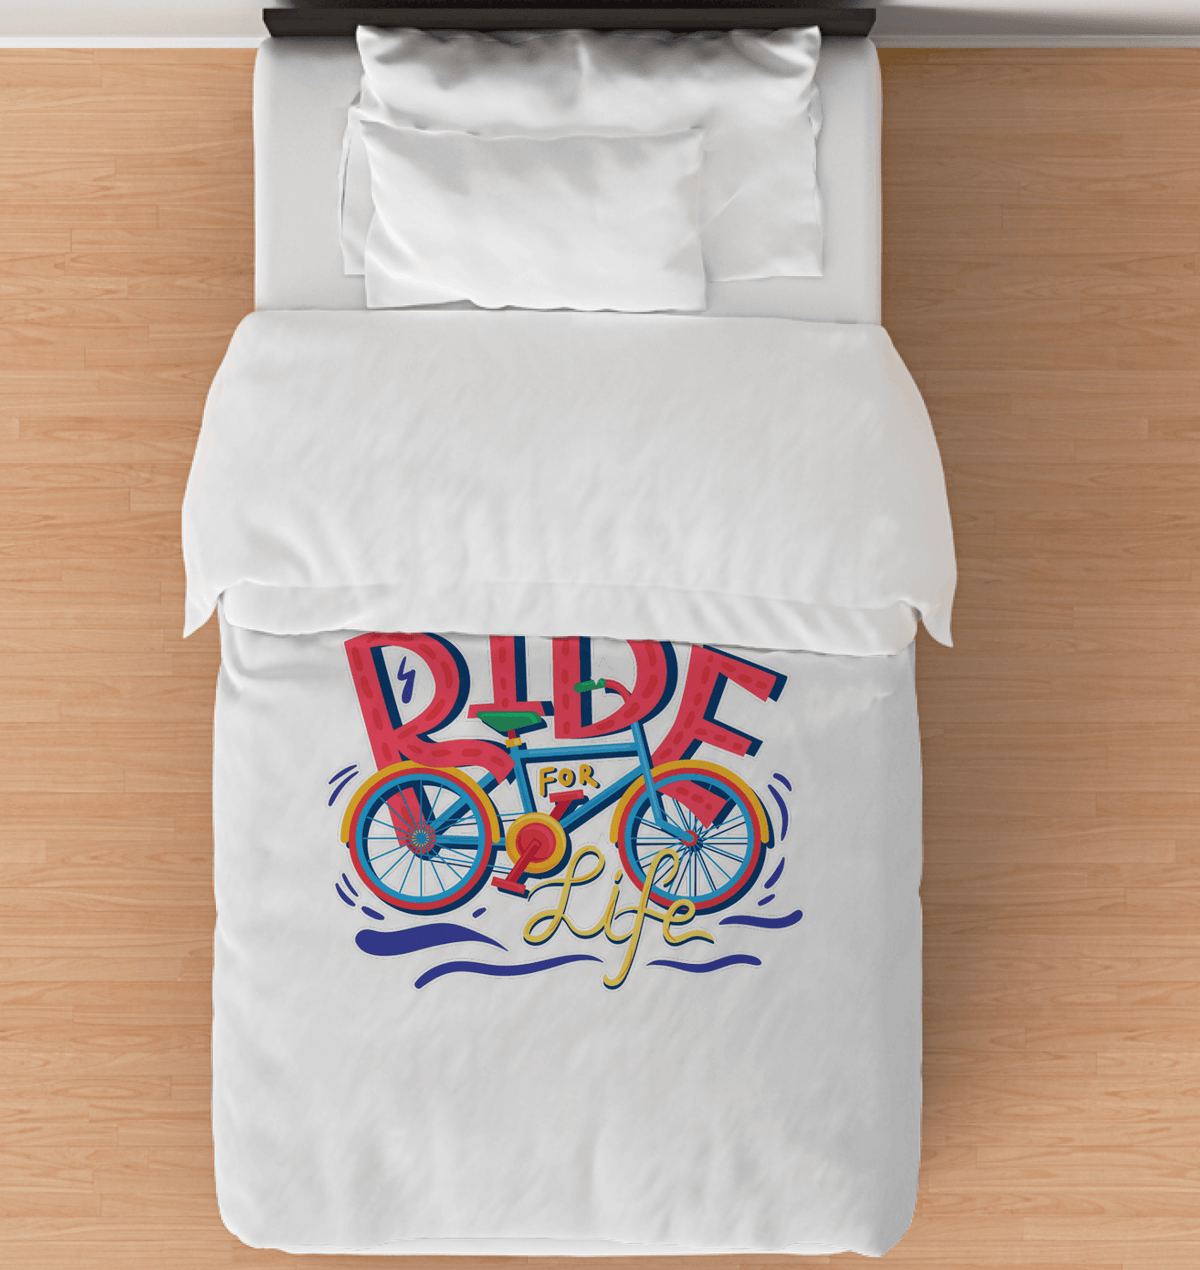 Ride For Life Comforter Twin - Beyond T-shirts